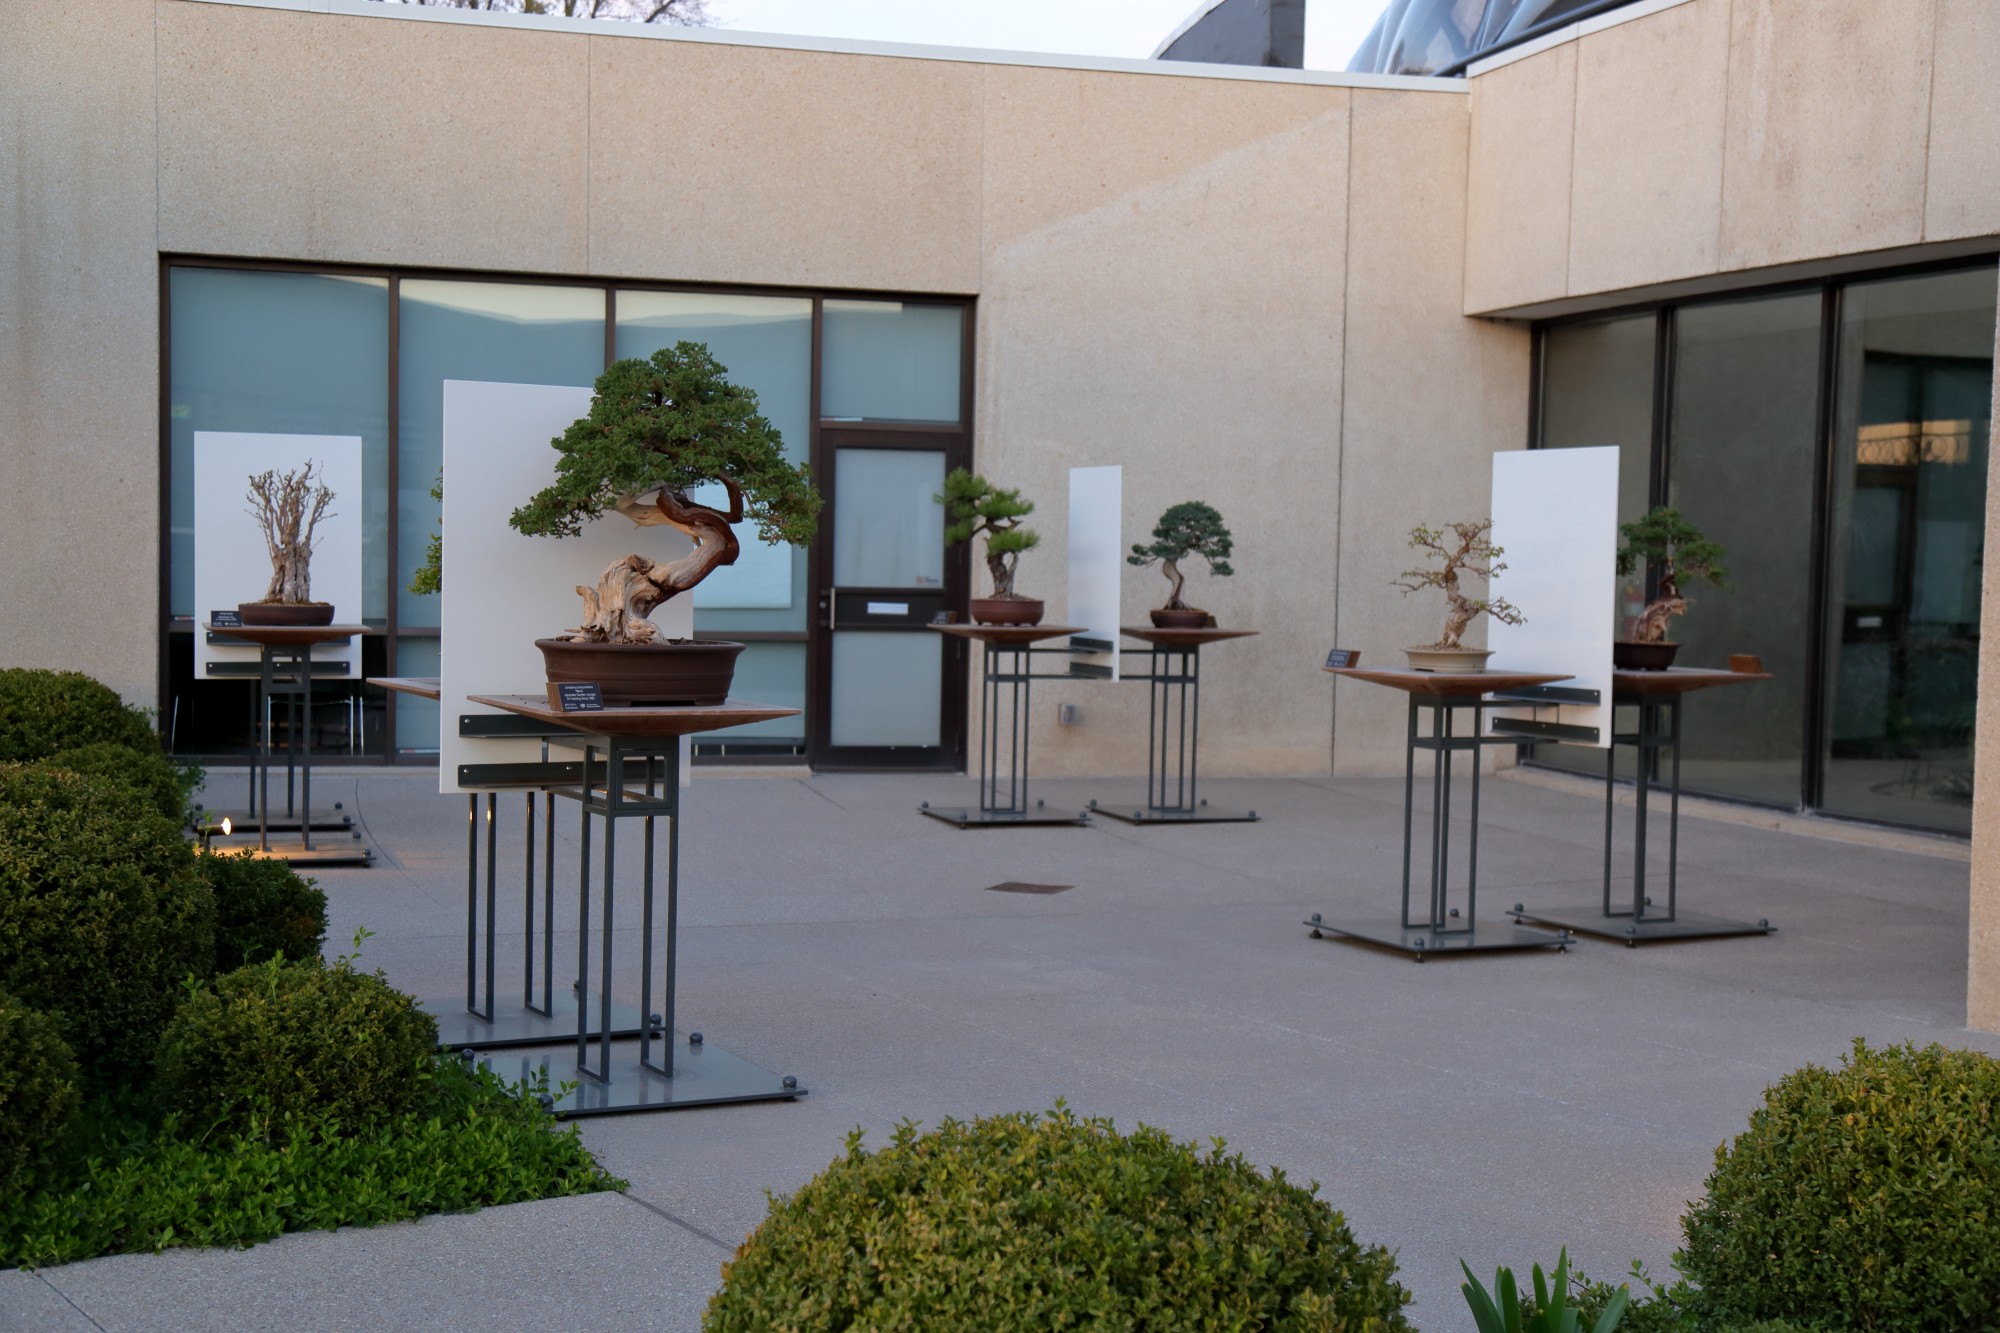 The Bonsai Gallery, April 2015. Photo by Kelly Norris.